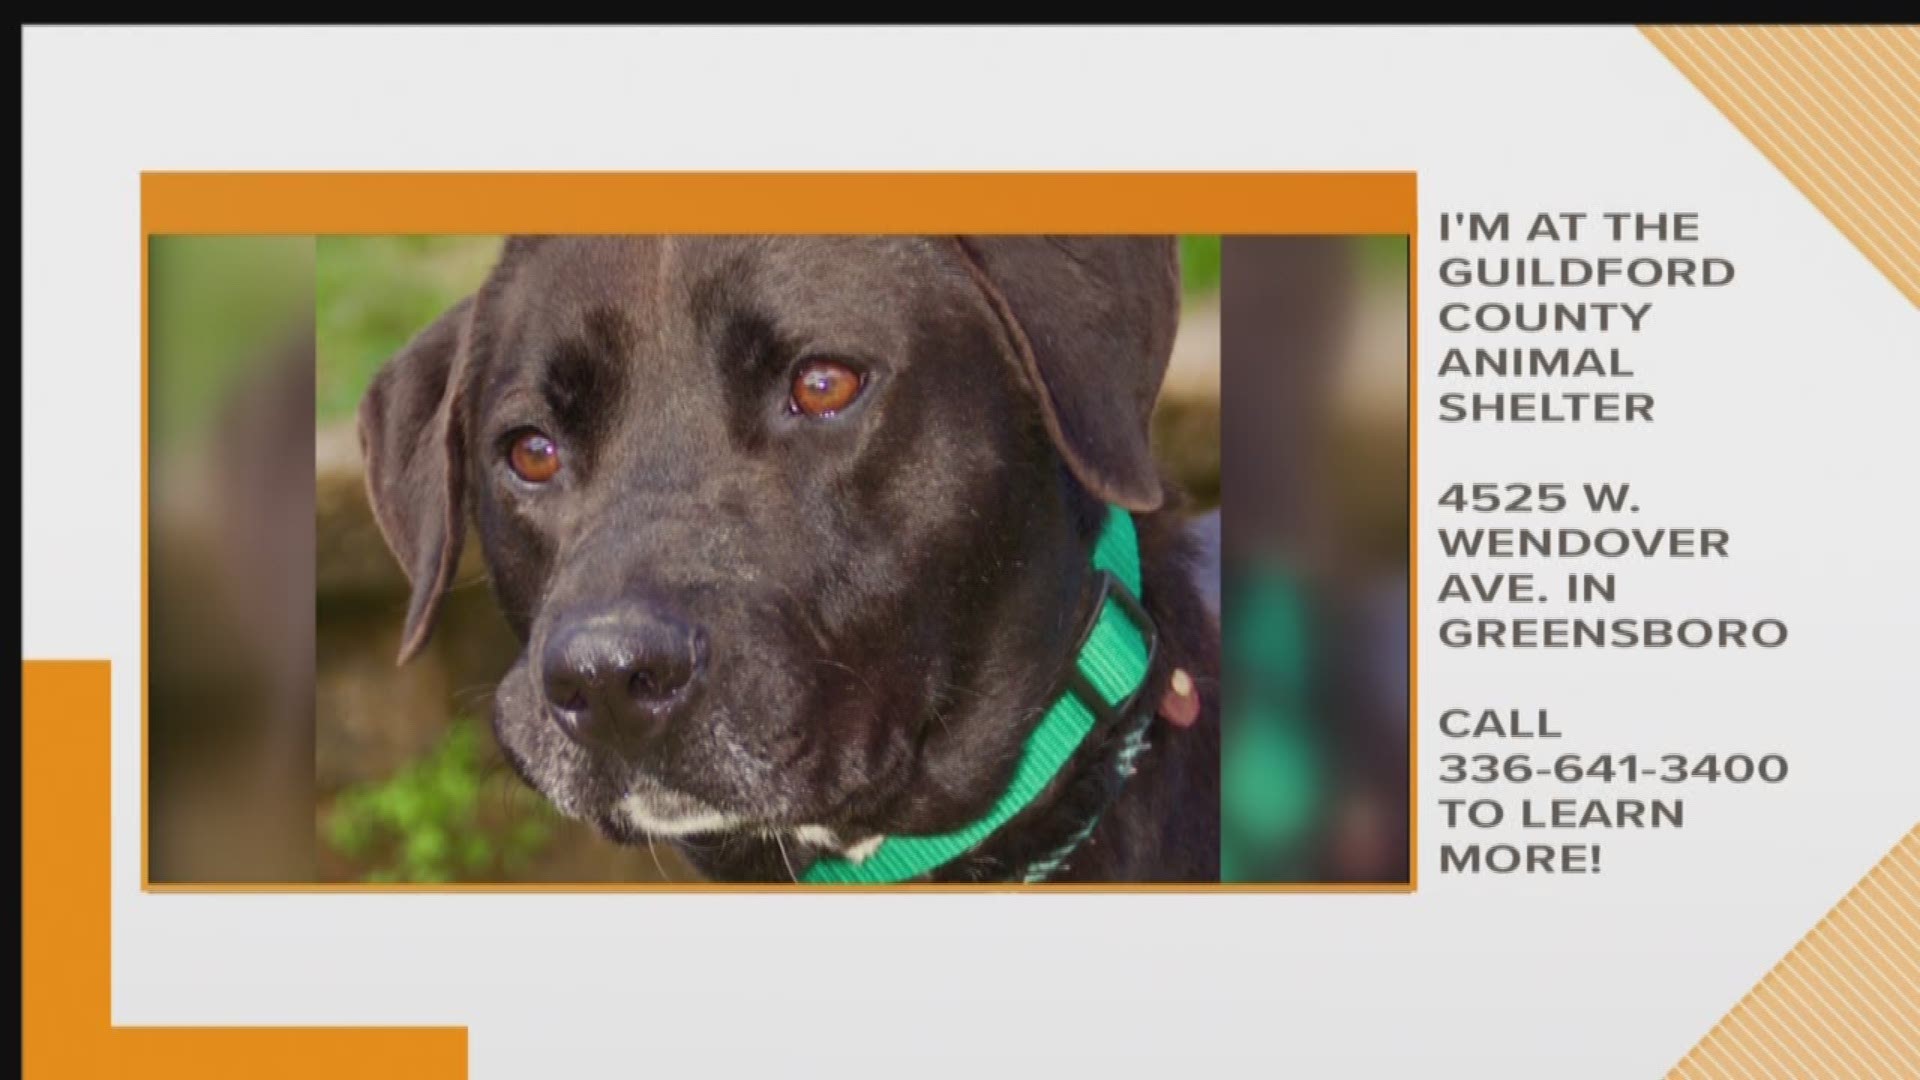 This 3-year-old lab mix is gentle and loving